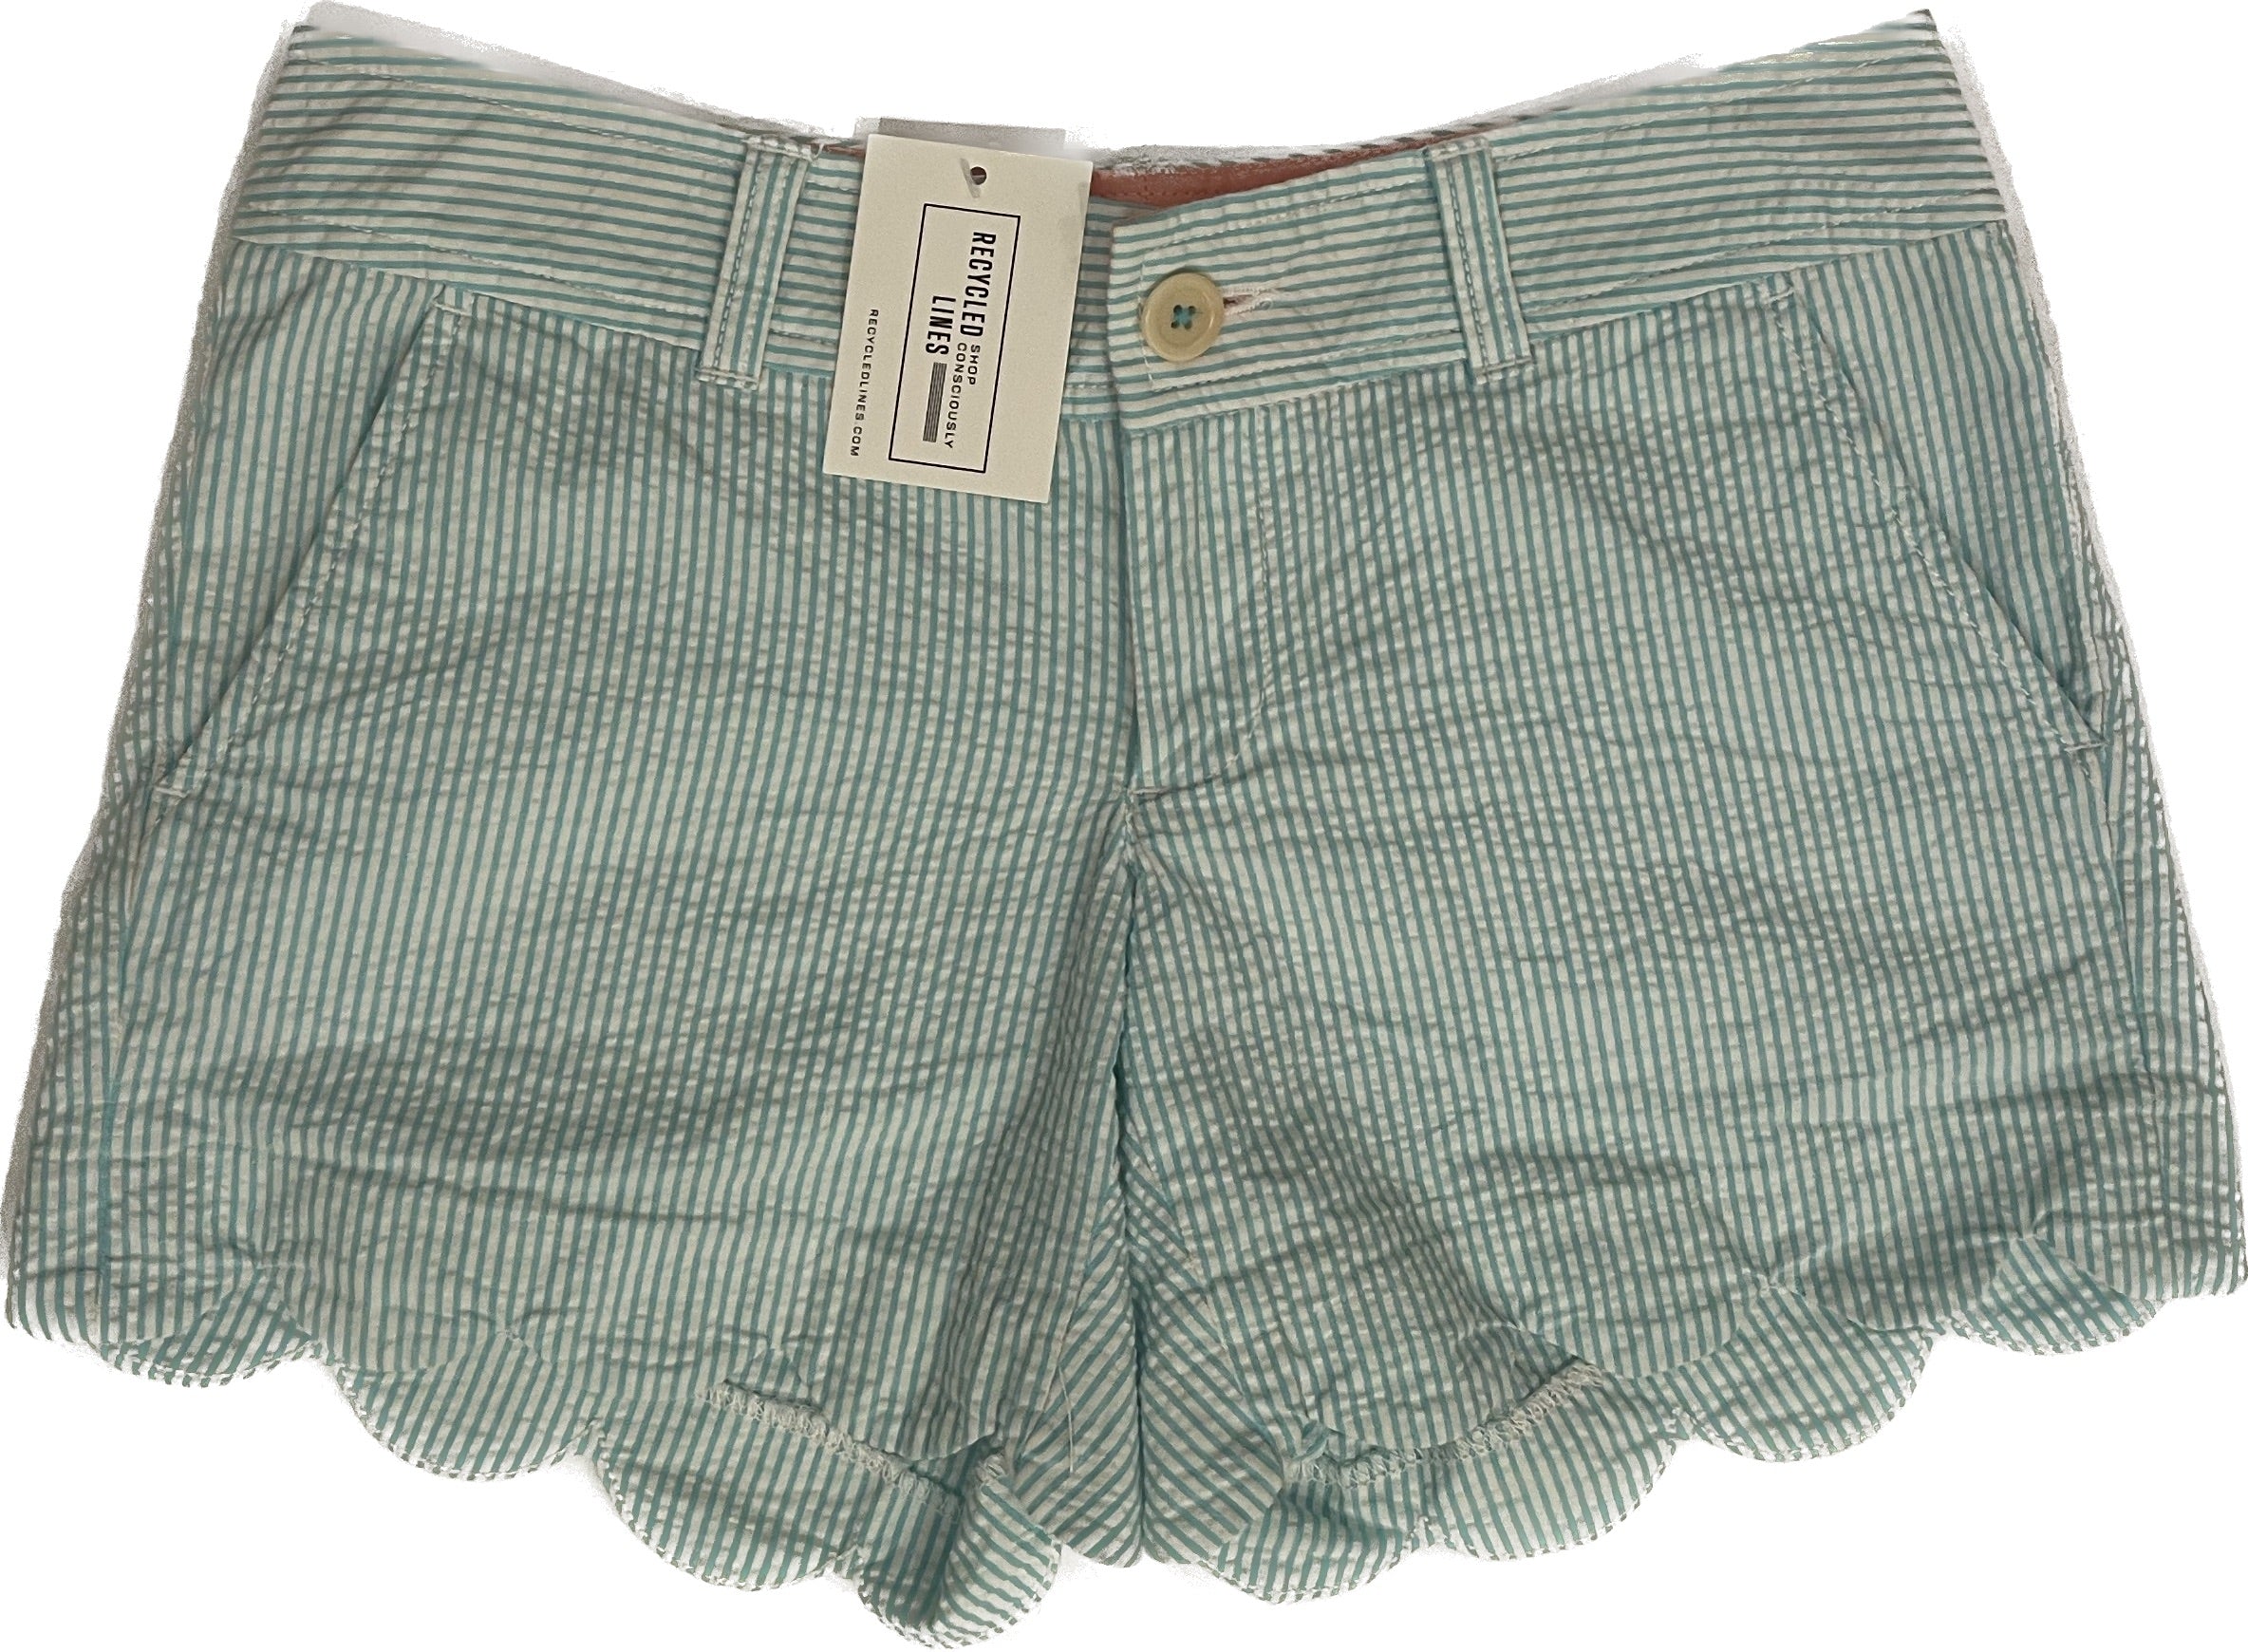 Lilly Pulitzer Shorts, Green Stripe Womens Size 00